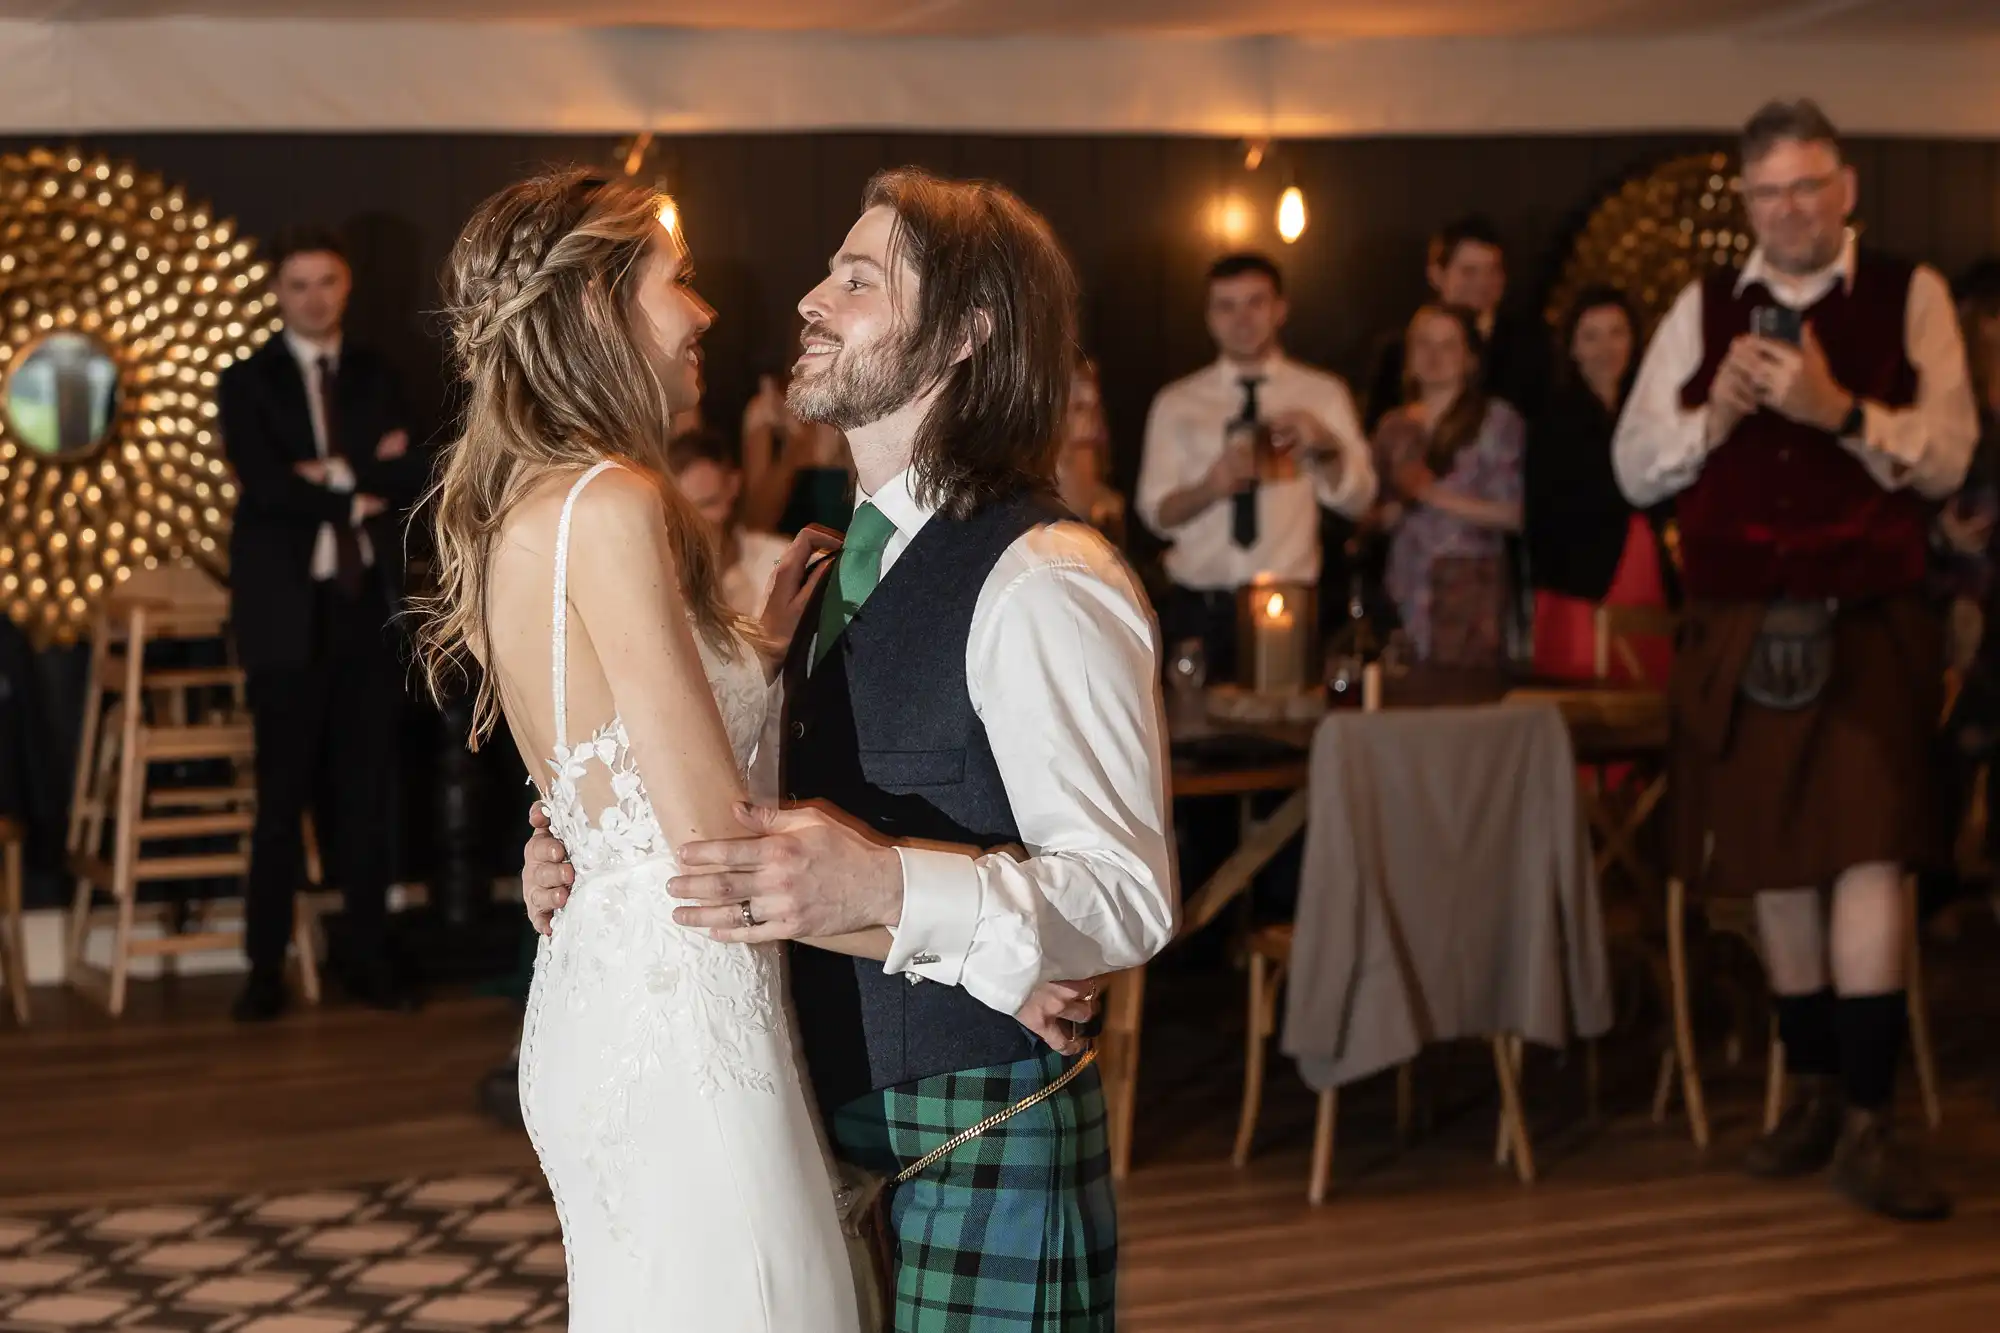 A bride and groom dance together, with guests watching in the background. The groom is wearing a kilt, and the event appears to be a wedding reception.